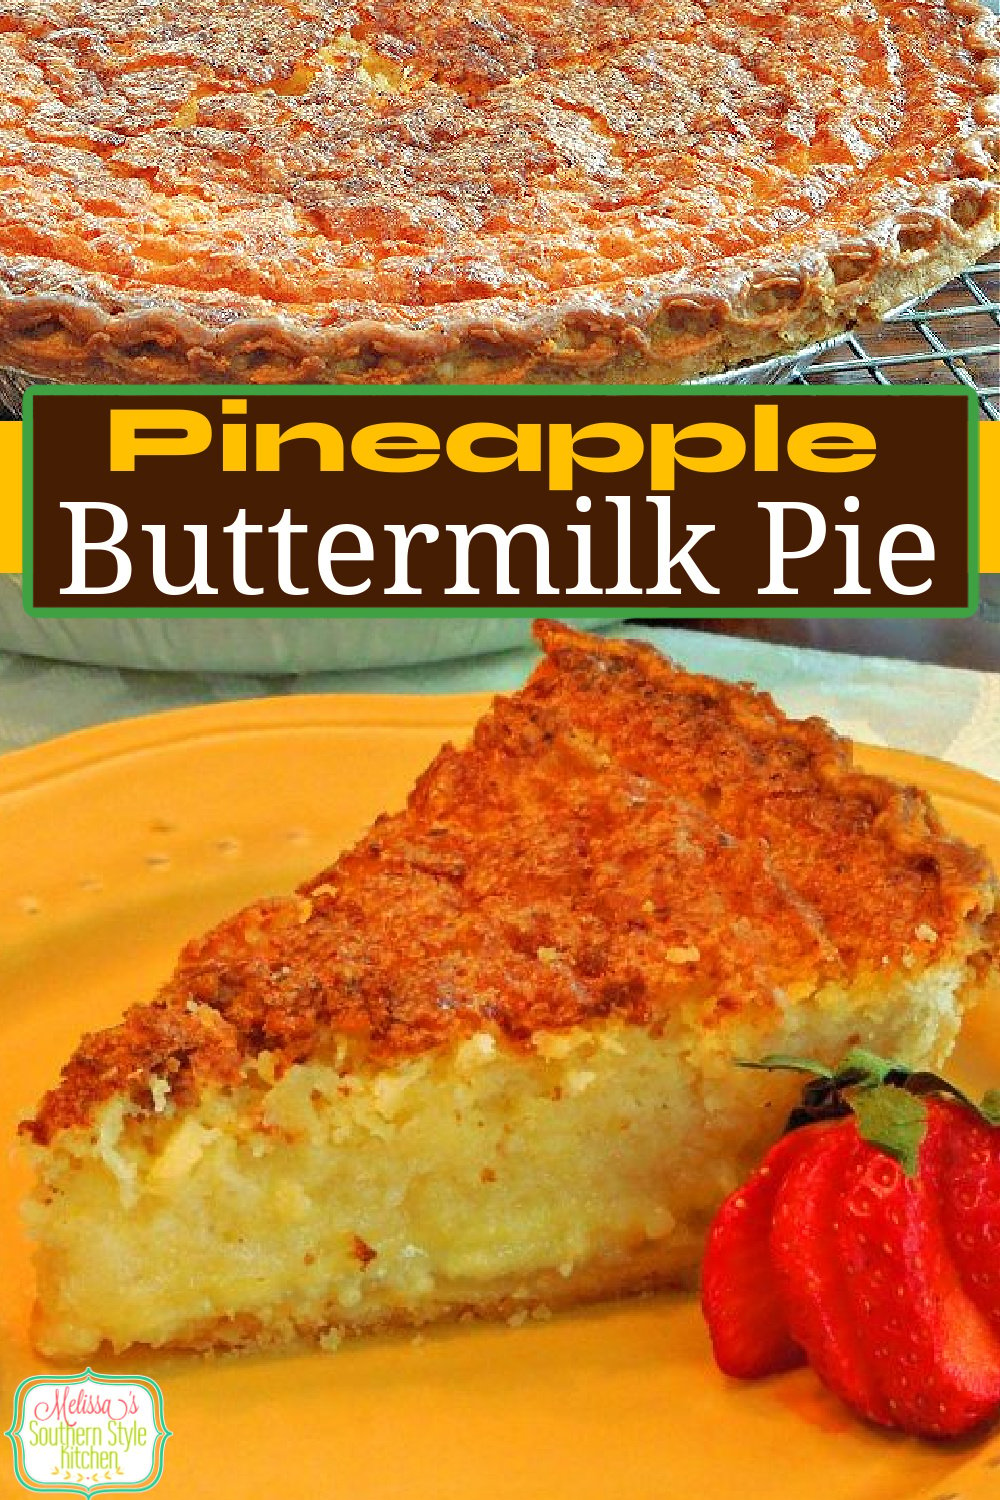 Enjoy a big piece of this Southern Pineapple Buttermilk Pie with whipped cream and fresh berries for dessert #pineapplepie #pineapplebuttermilkpie #southernbuttermilkpie #buttermilkpie #pierecipes #southerndesserts #pierecipes #southernfood #southernrecipes #fallbaking #holidaybaking #thanksgiving via @melissasssk